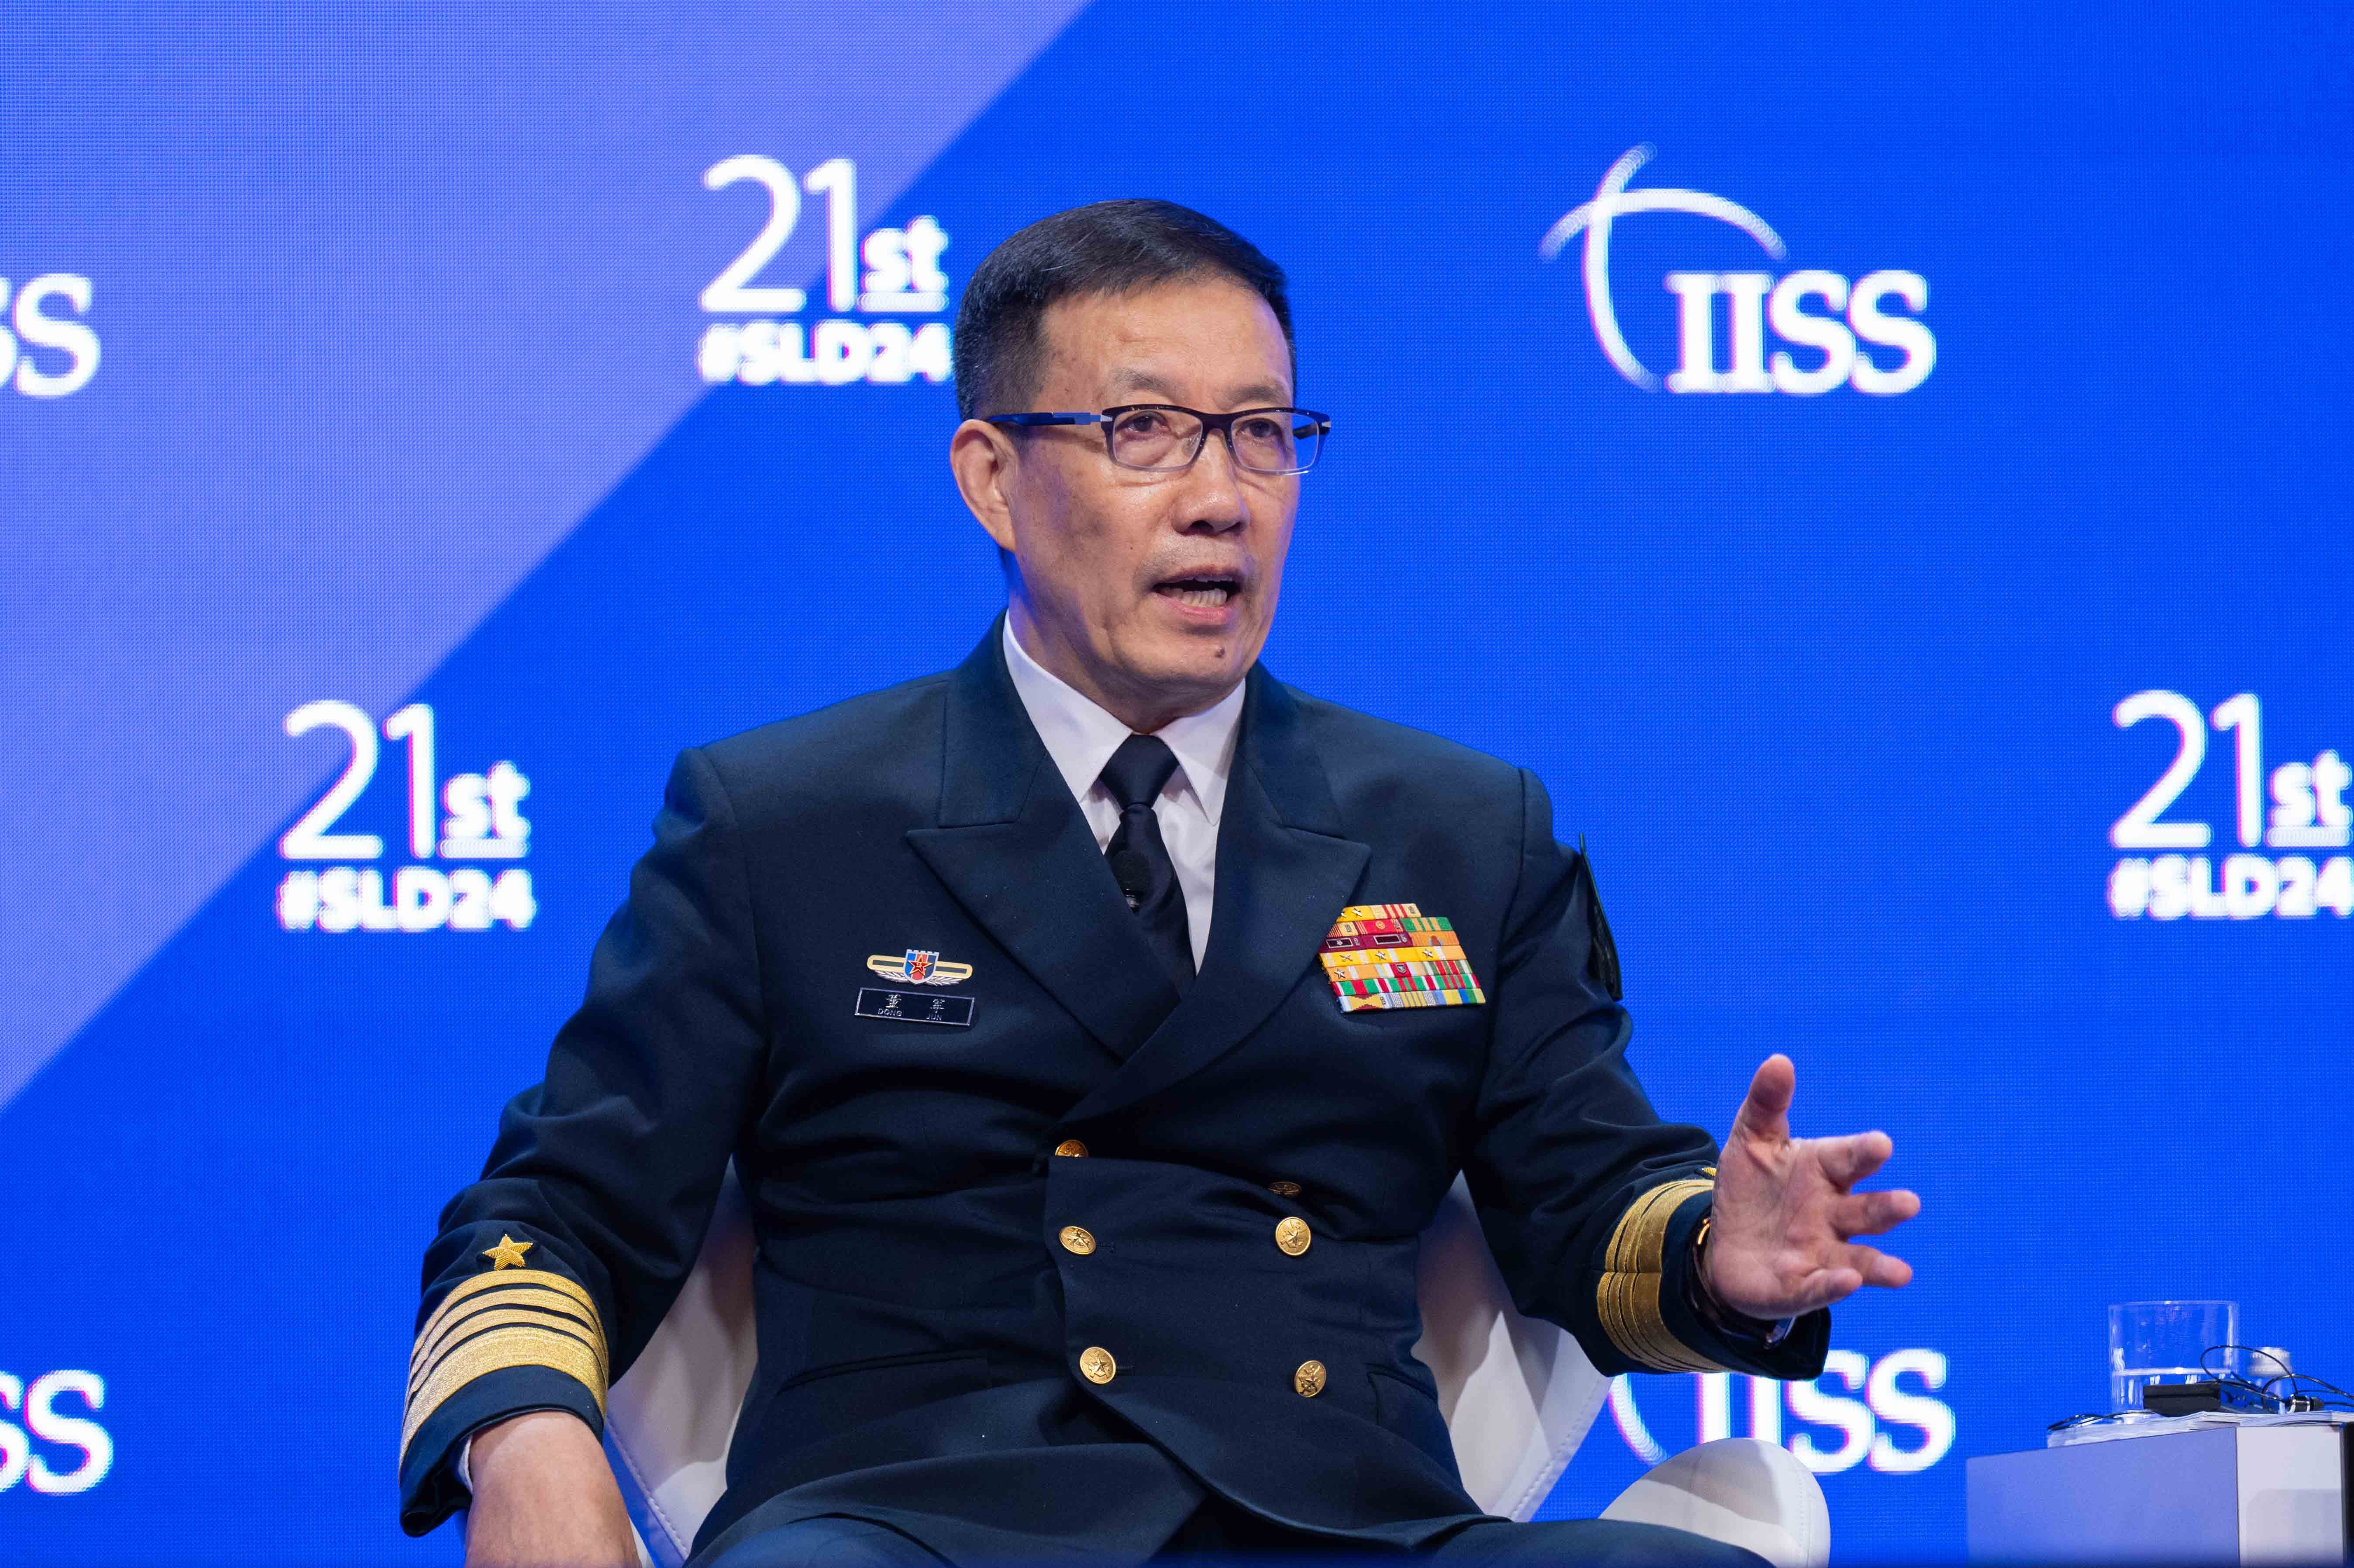 China's Defense Minister Admiral Dong Jun, speaking at the same briefing as Mr Zelensky, denied Beijing supported Russia's war effort.